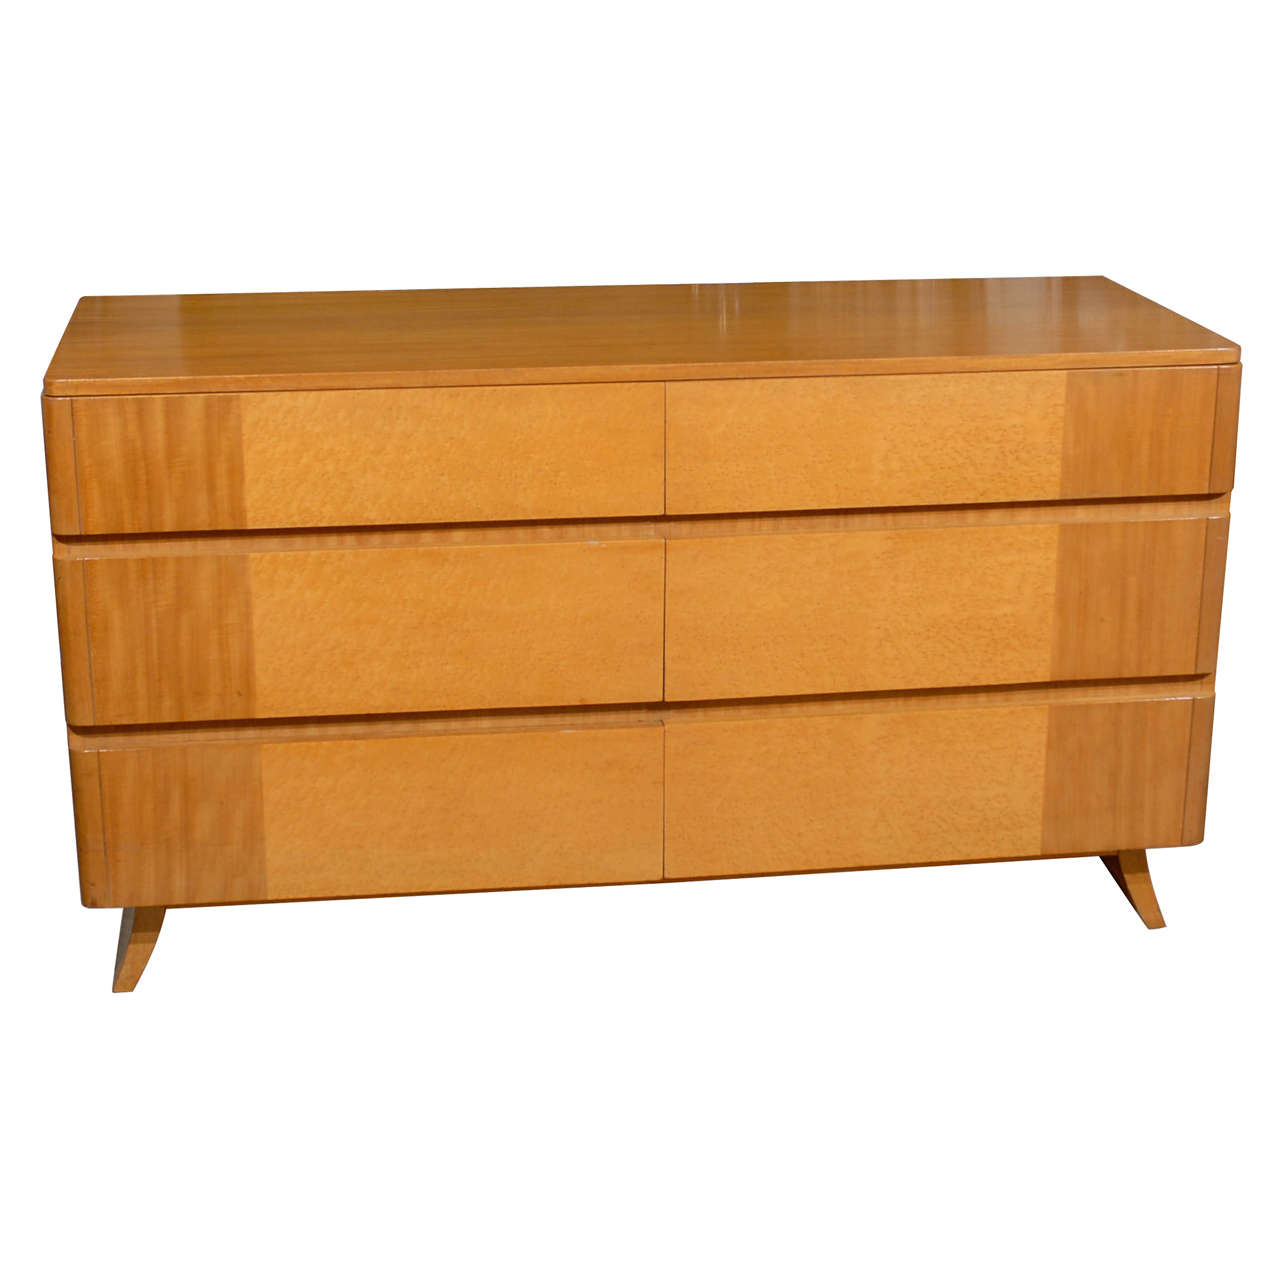 Gorgeous Rway Six-Drawer Chest in Blonde Mahogany and Bird's-Eye Maple For Sale